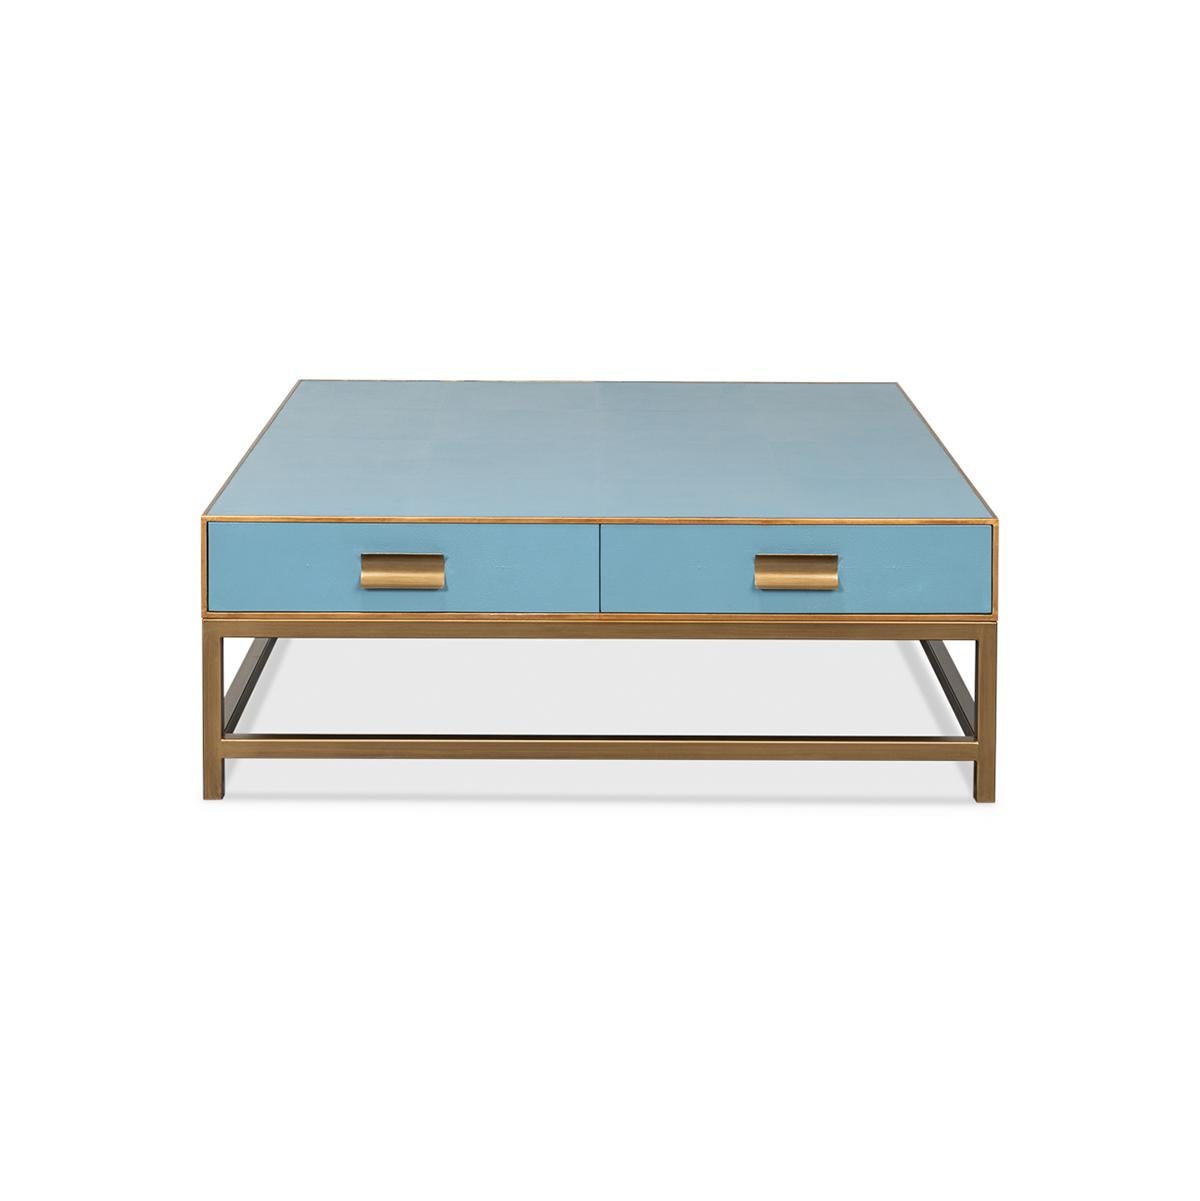 Crafted from wood with a shagreen embossed leather wrapped top, this square coffee table is finished with gold trim and hardware. With two drawers and raised on cube-form base with stretchers. The low-profile design makes it ideal for a functional